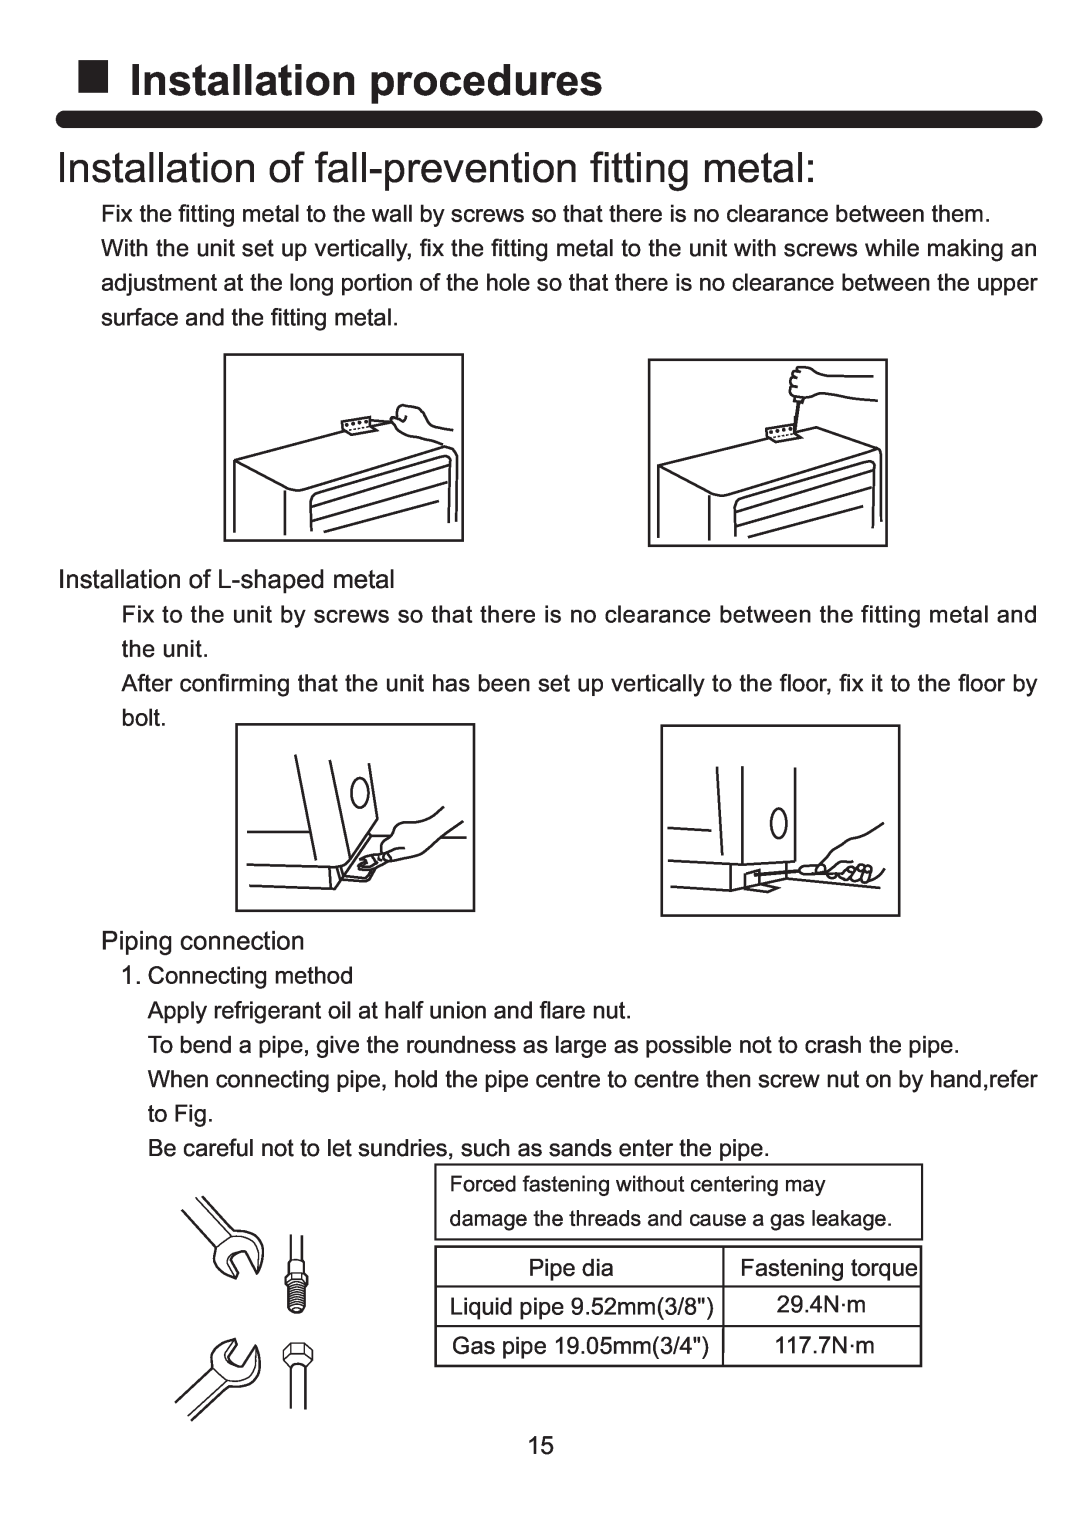 Haier HPU-42HH03 Installation procedures, Installation of fall-preventionfitting metal, Installation of L-shapedmetal 